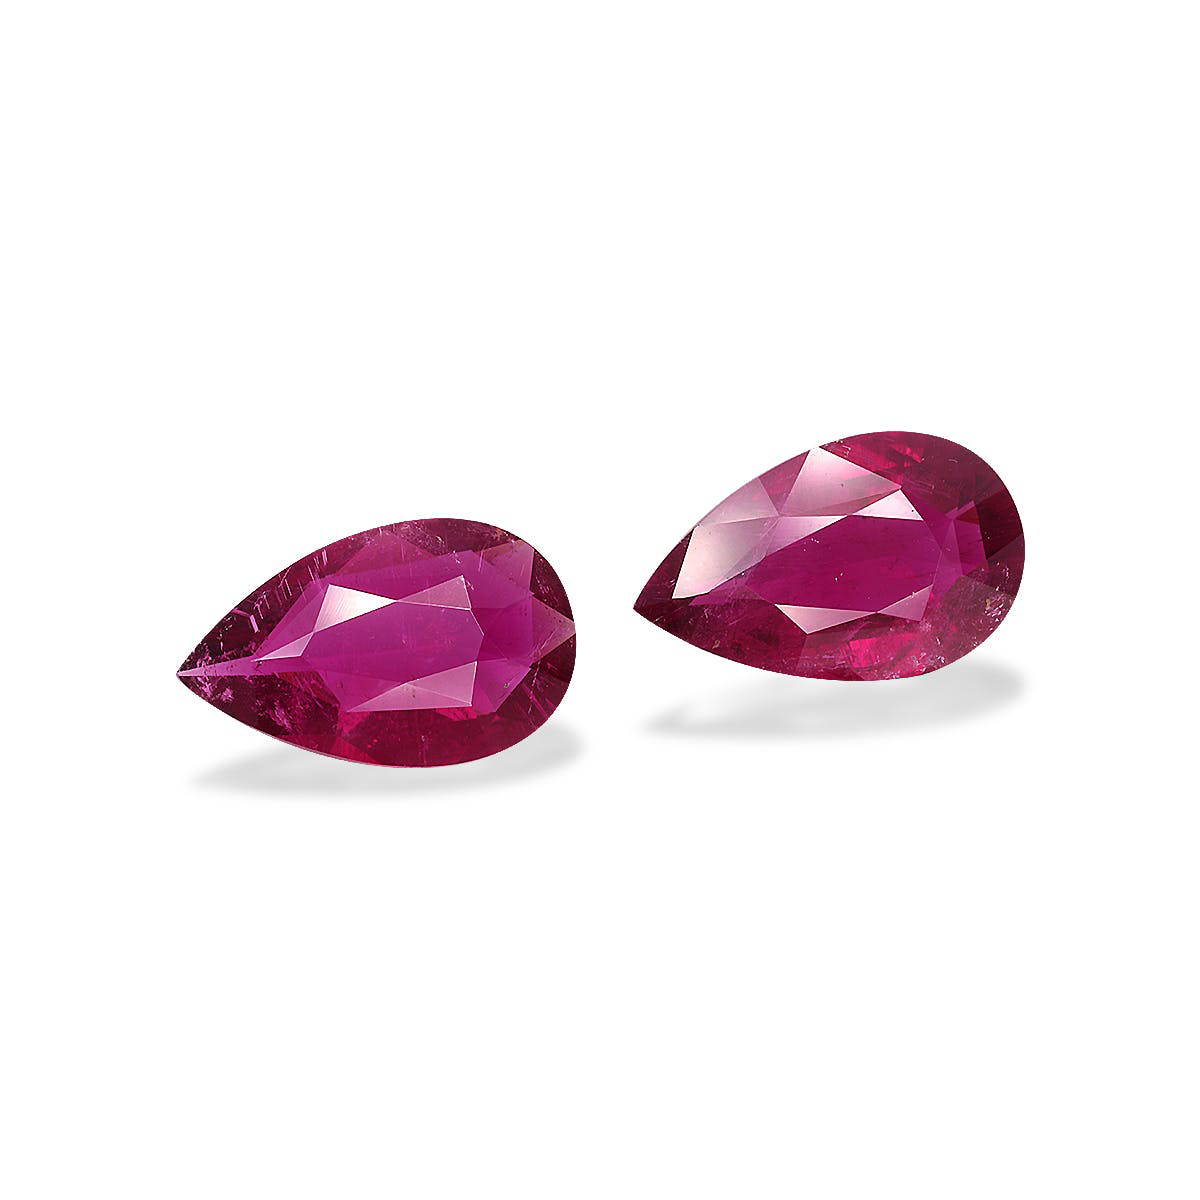 Picture of Red Rubellite Tourmaline 13.28ct - Pair (RL0256)